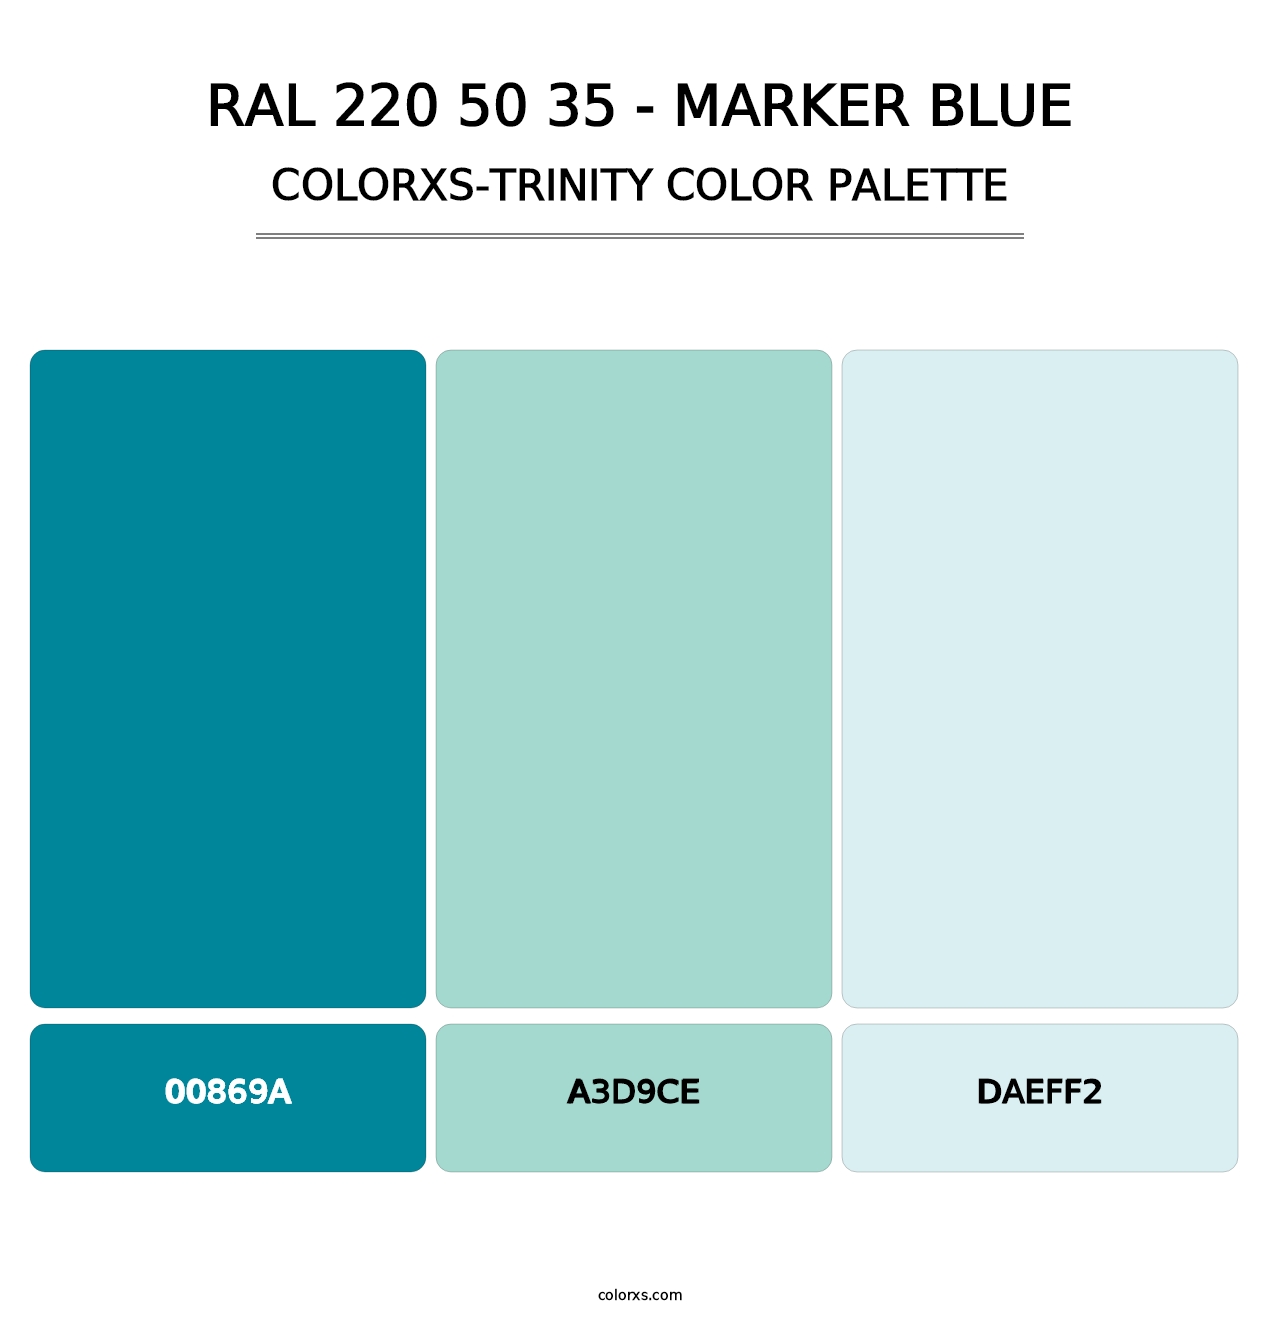 RAL 220 50 35 - Marker Blue - Colorxs Trinity Palette